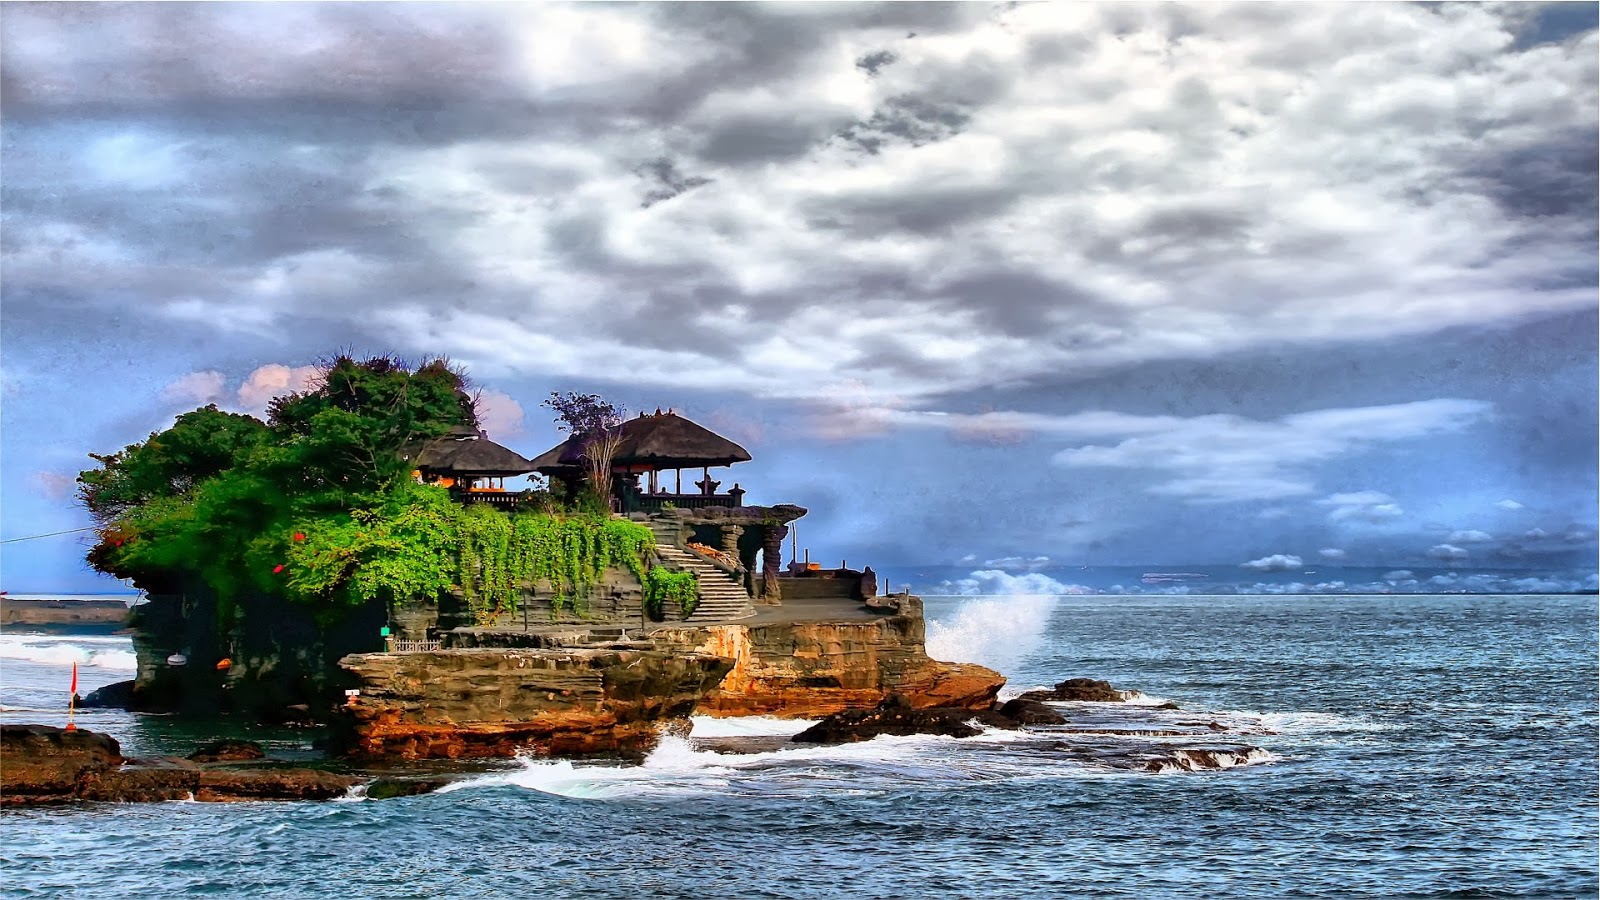  WALLPAPER ANDROID IPHONE Wallpaper Bali Indonesia